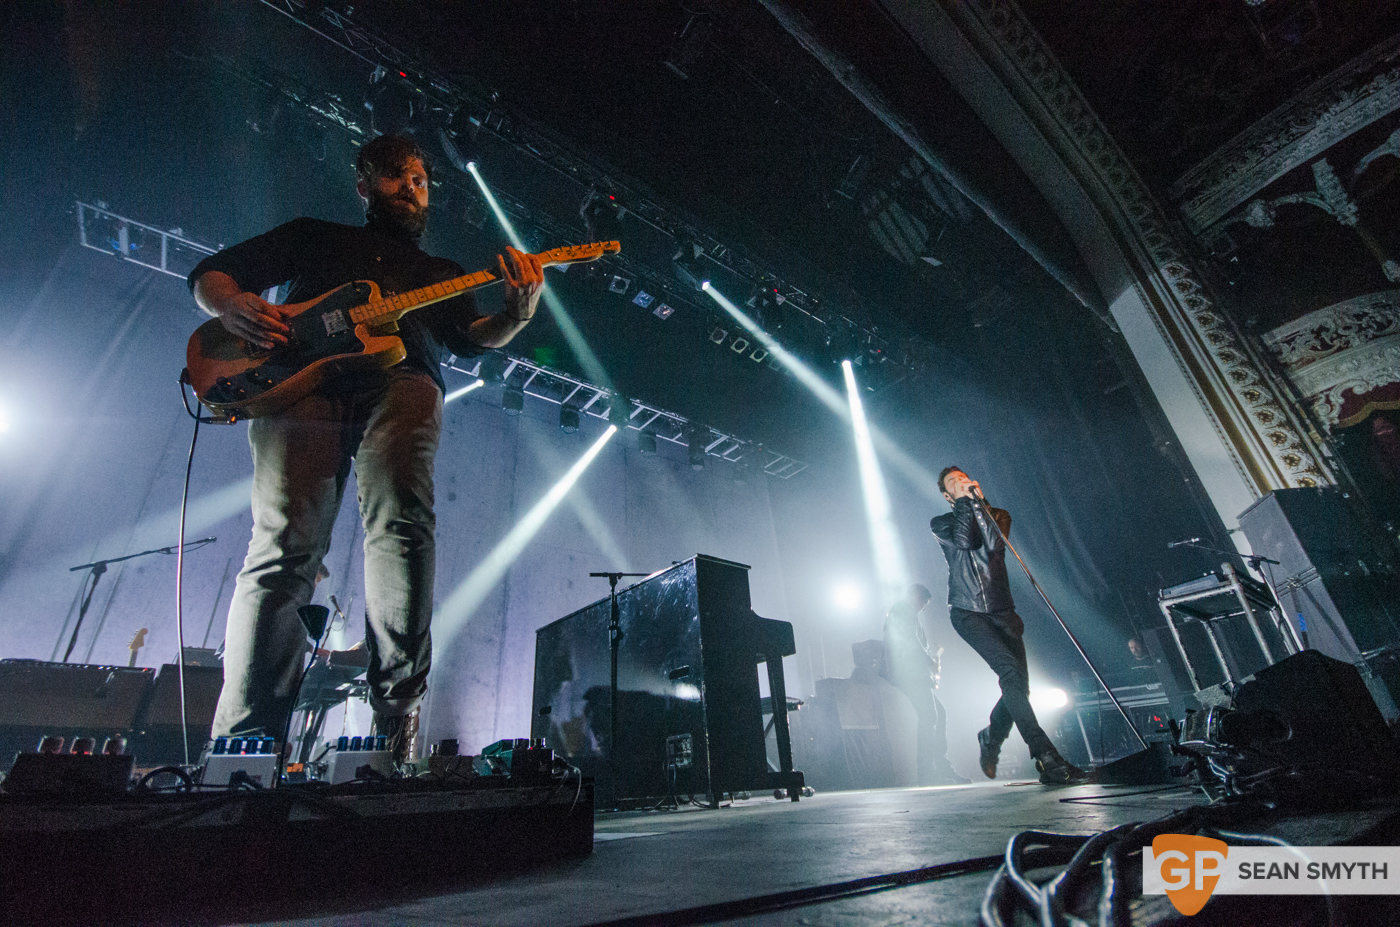 editors-at-the-olympia-theatre-by-sean-smyth-10-10-15-26-of-28_21469301813_o